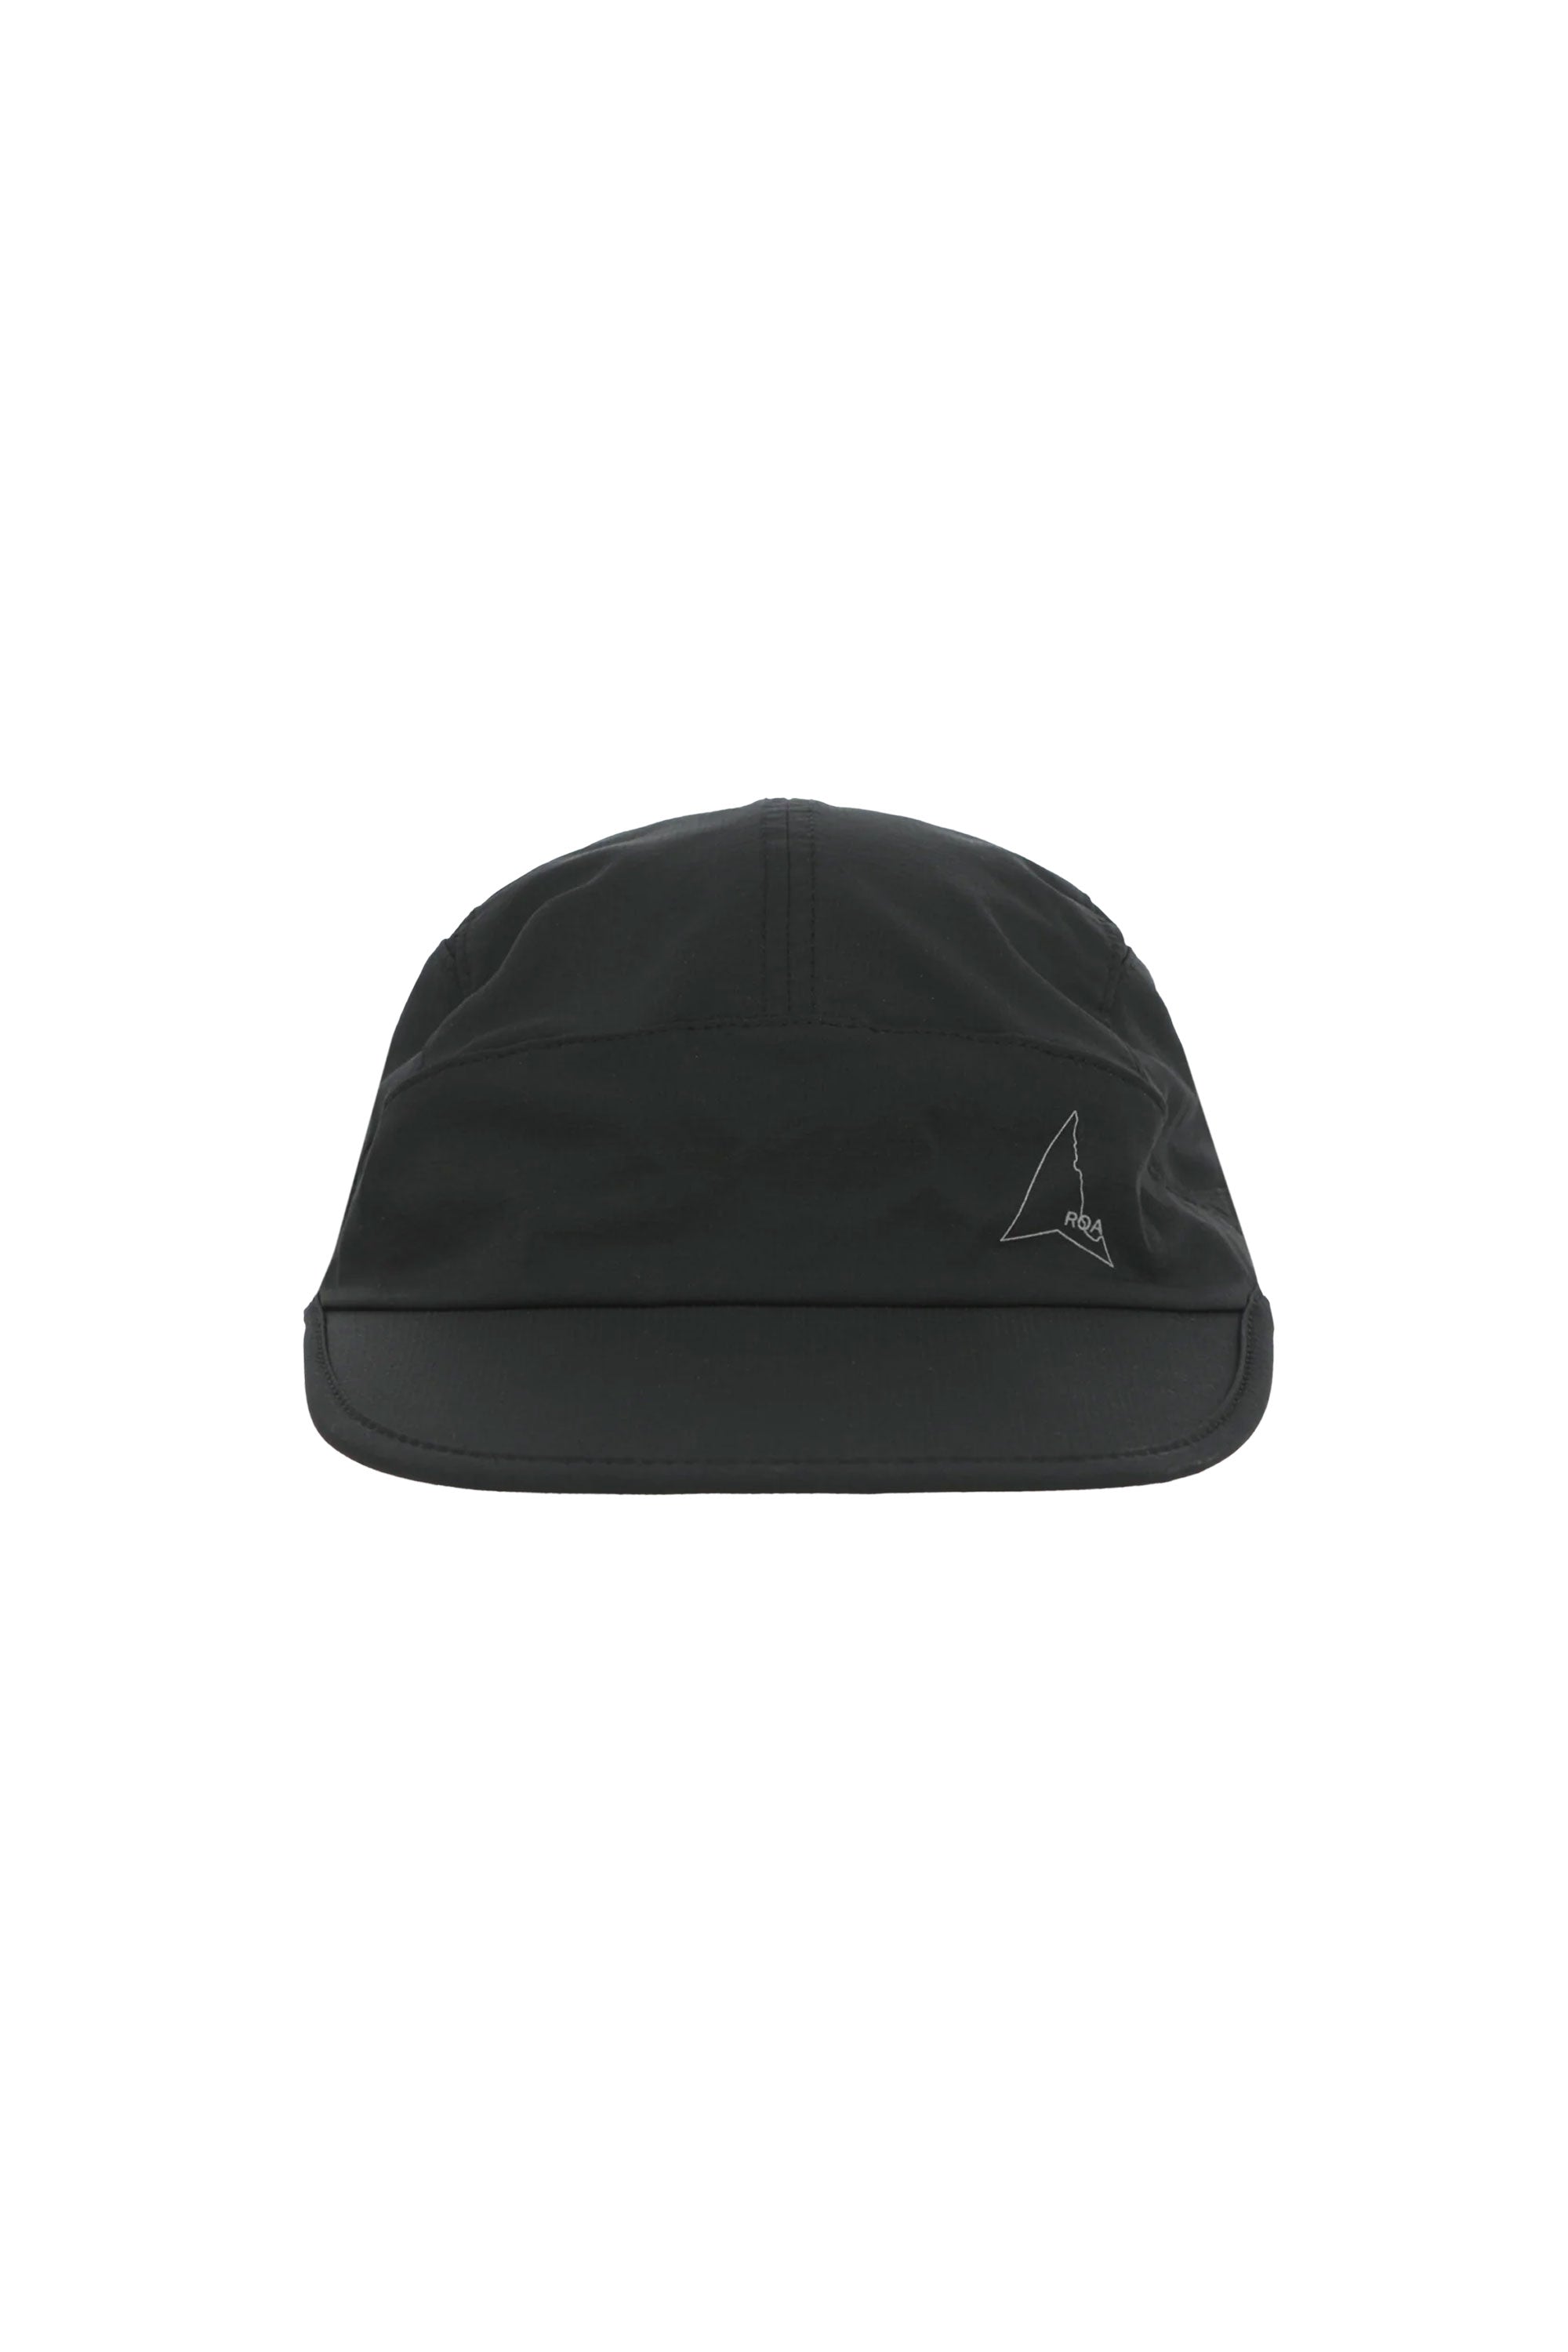 The ROA - CAP BLACK available online with global shipping, and in PAM Stores Melbourne and Sydney.